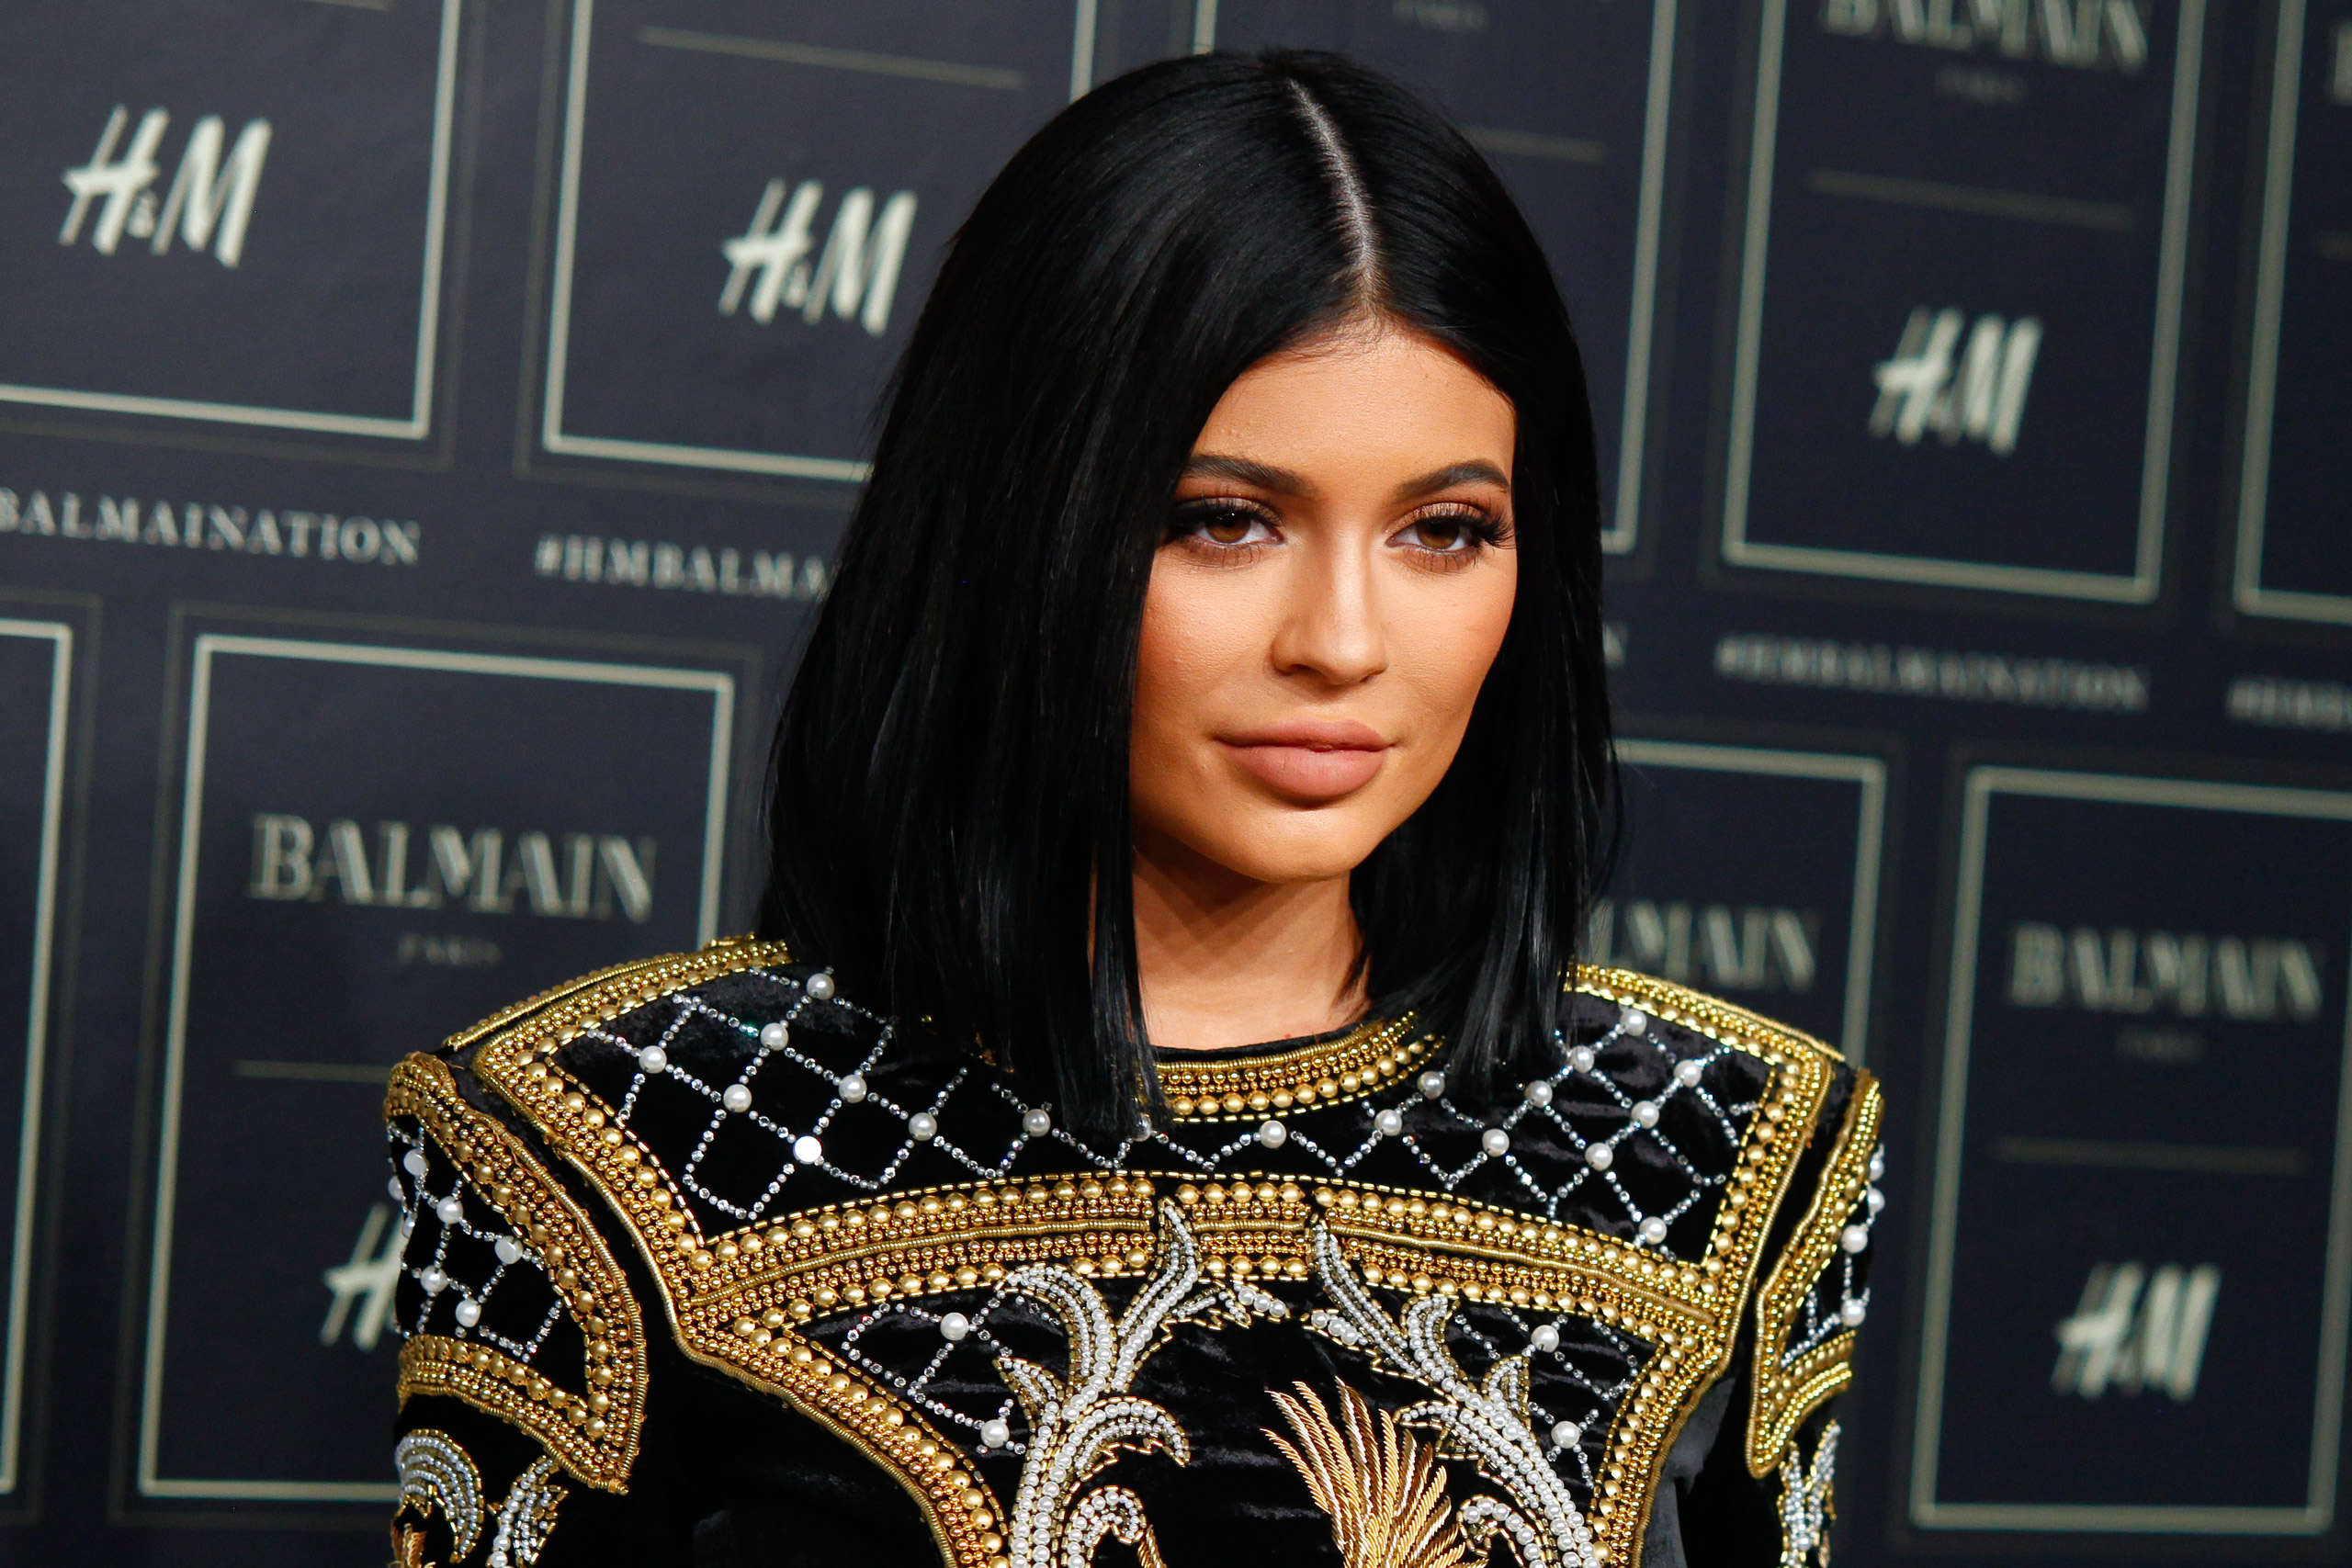 Kylie Jenner attends the BALMAIN x H&amp;M Collection launch event at 23 Wall Street on Oct. 20, 2015 in New York City . (Andy Kropa—Invision/AP)